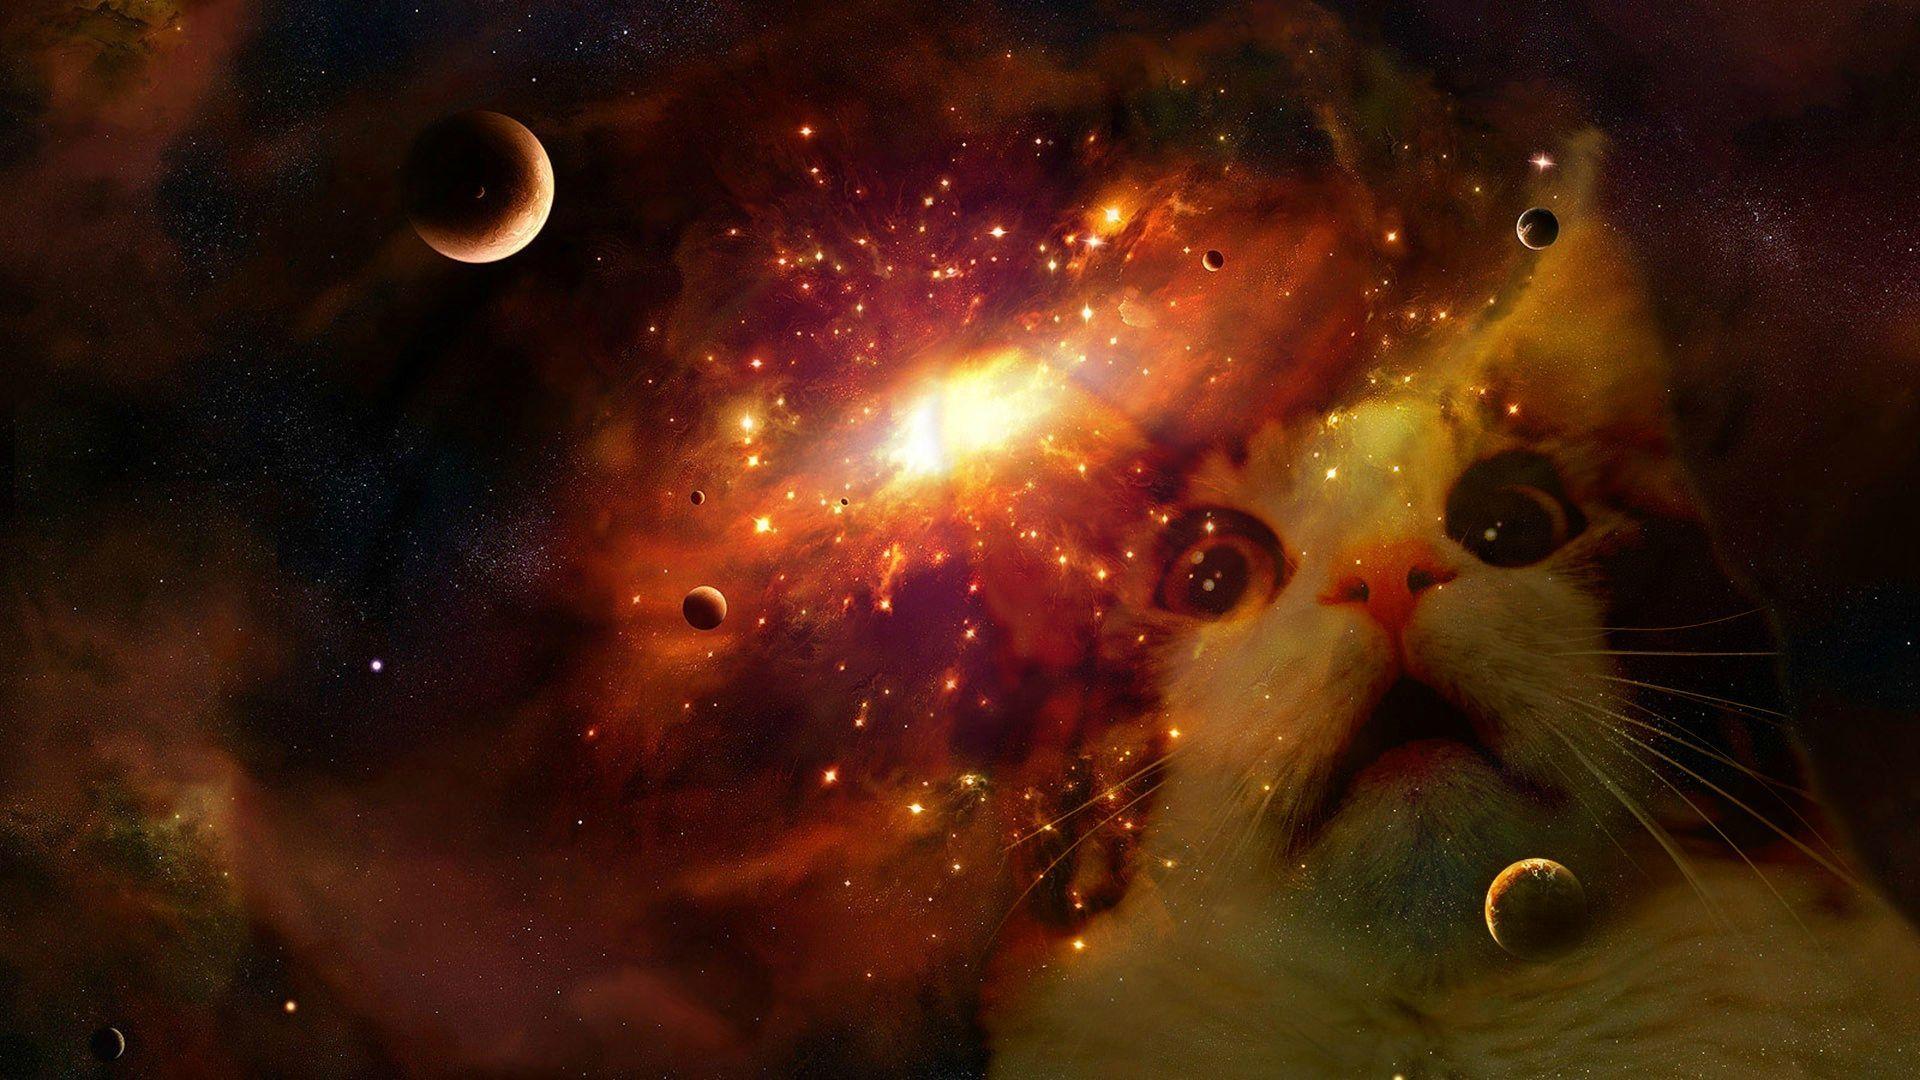 Space Cat IPhone Wallpaper  IPhone Wallpapers  iPhone Wallpapers